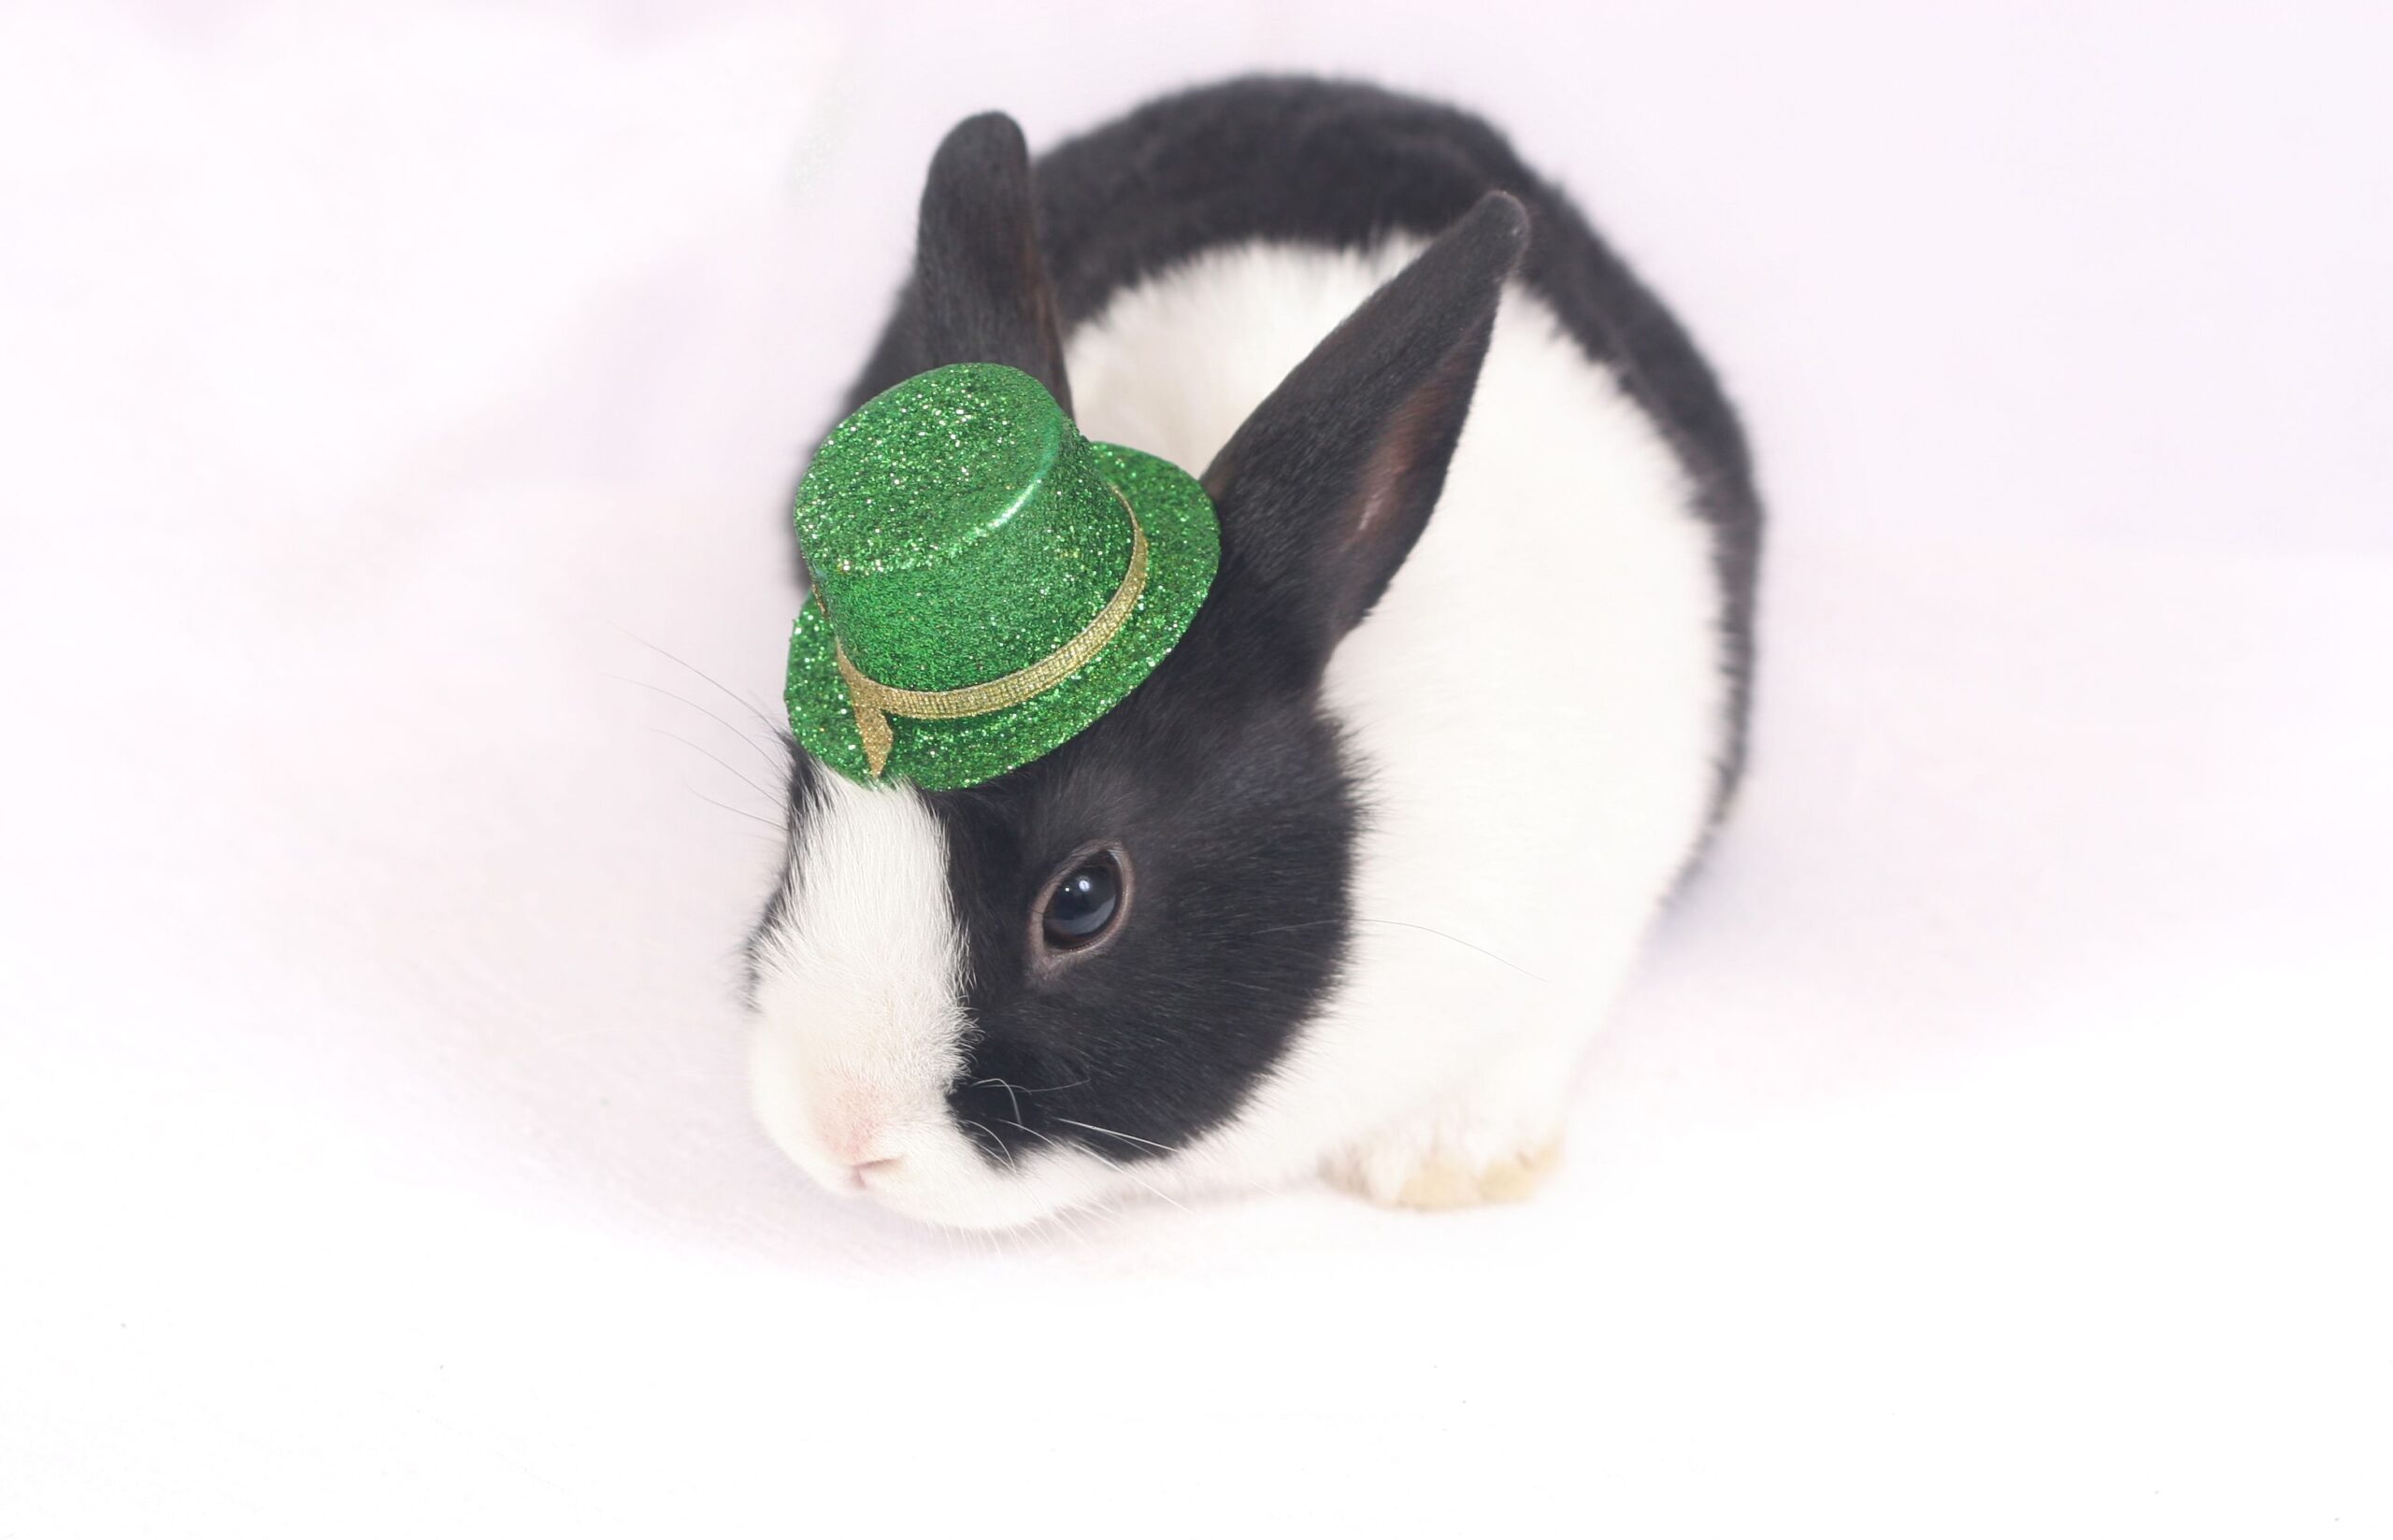 6 Ways To Celebrate Your Pets on St. Patrick's Day